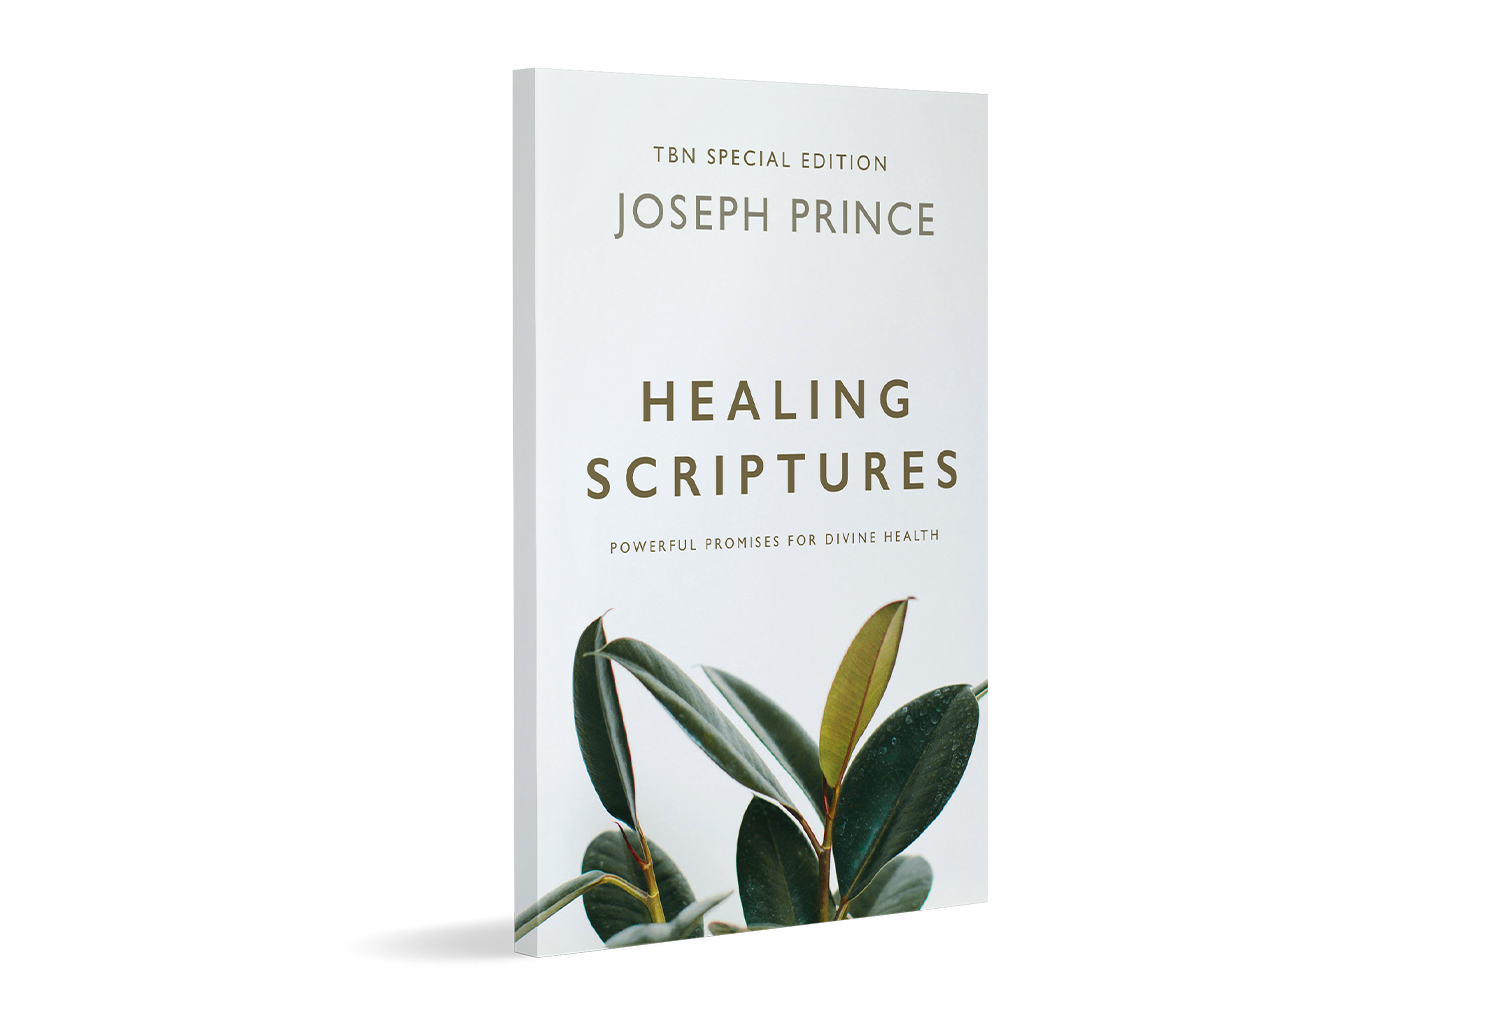 Pastor Joseph Prince’s Healing Scriptures: Powerful Promises for Divine Health on TBN